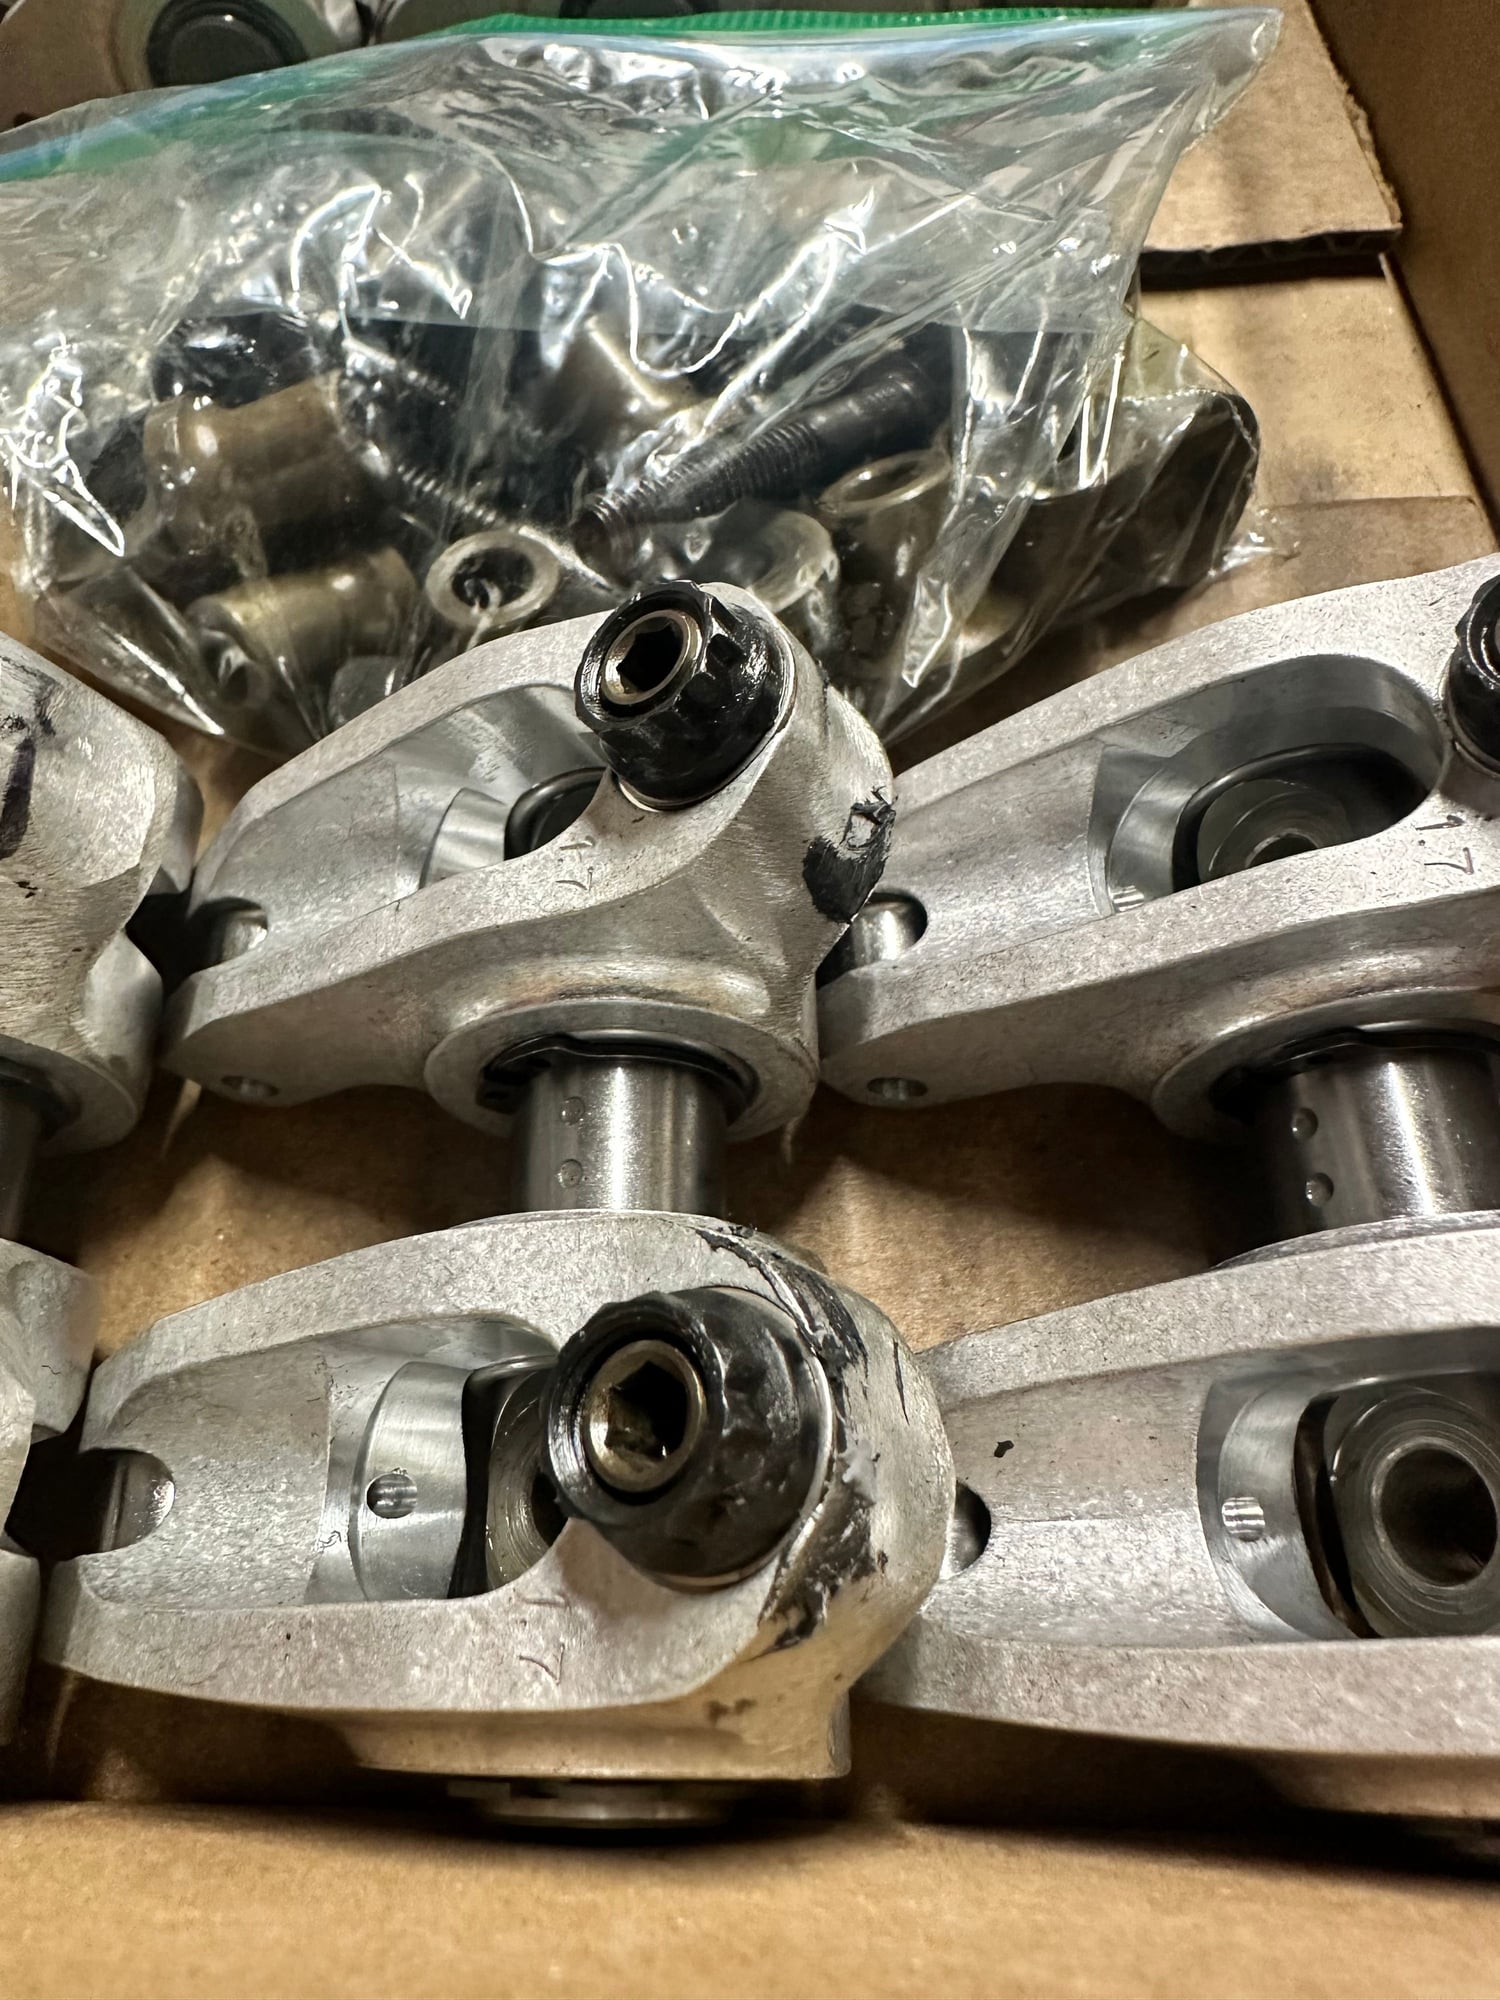 Engine - Internals - Yella Terra Roller Rocker Arms - Used - All Years  All Models - Granite Falls, NC 28630, United States